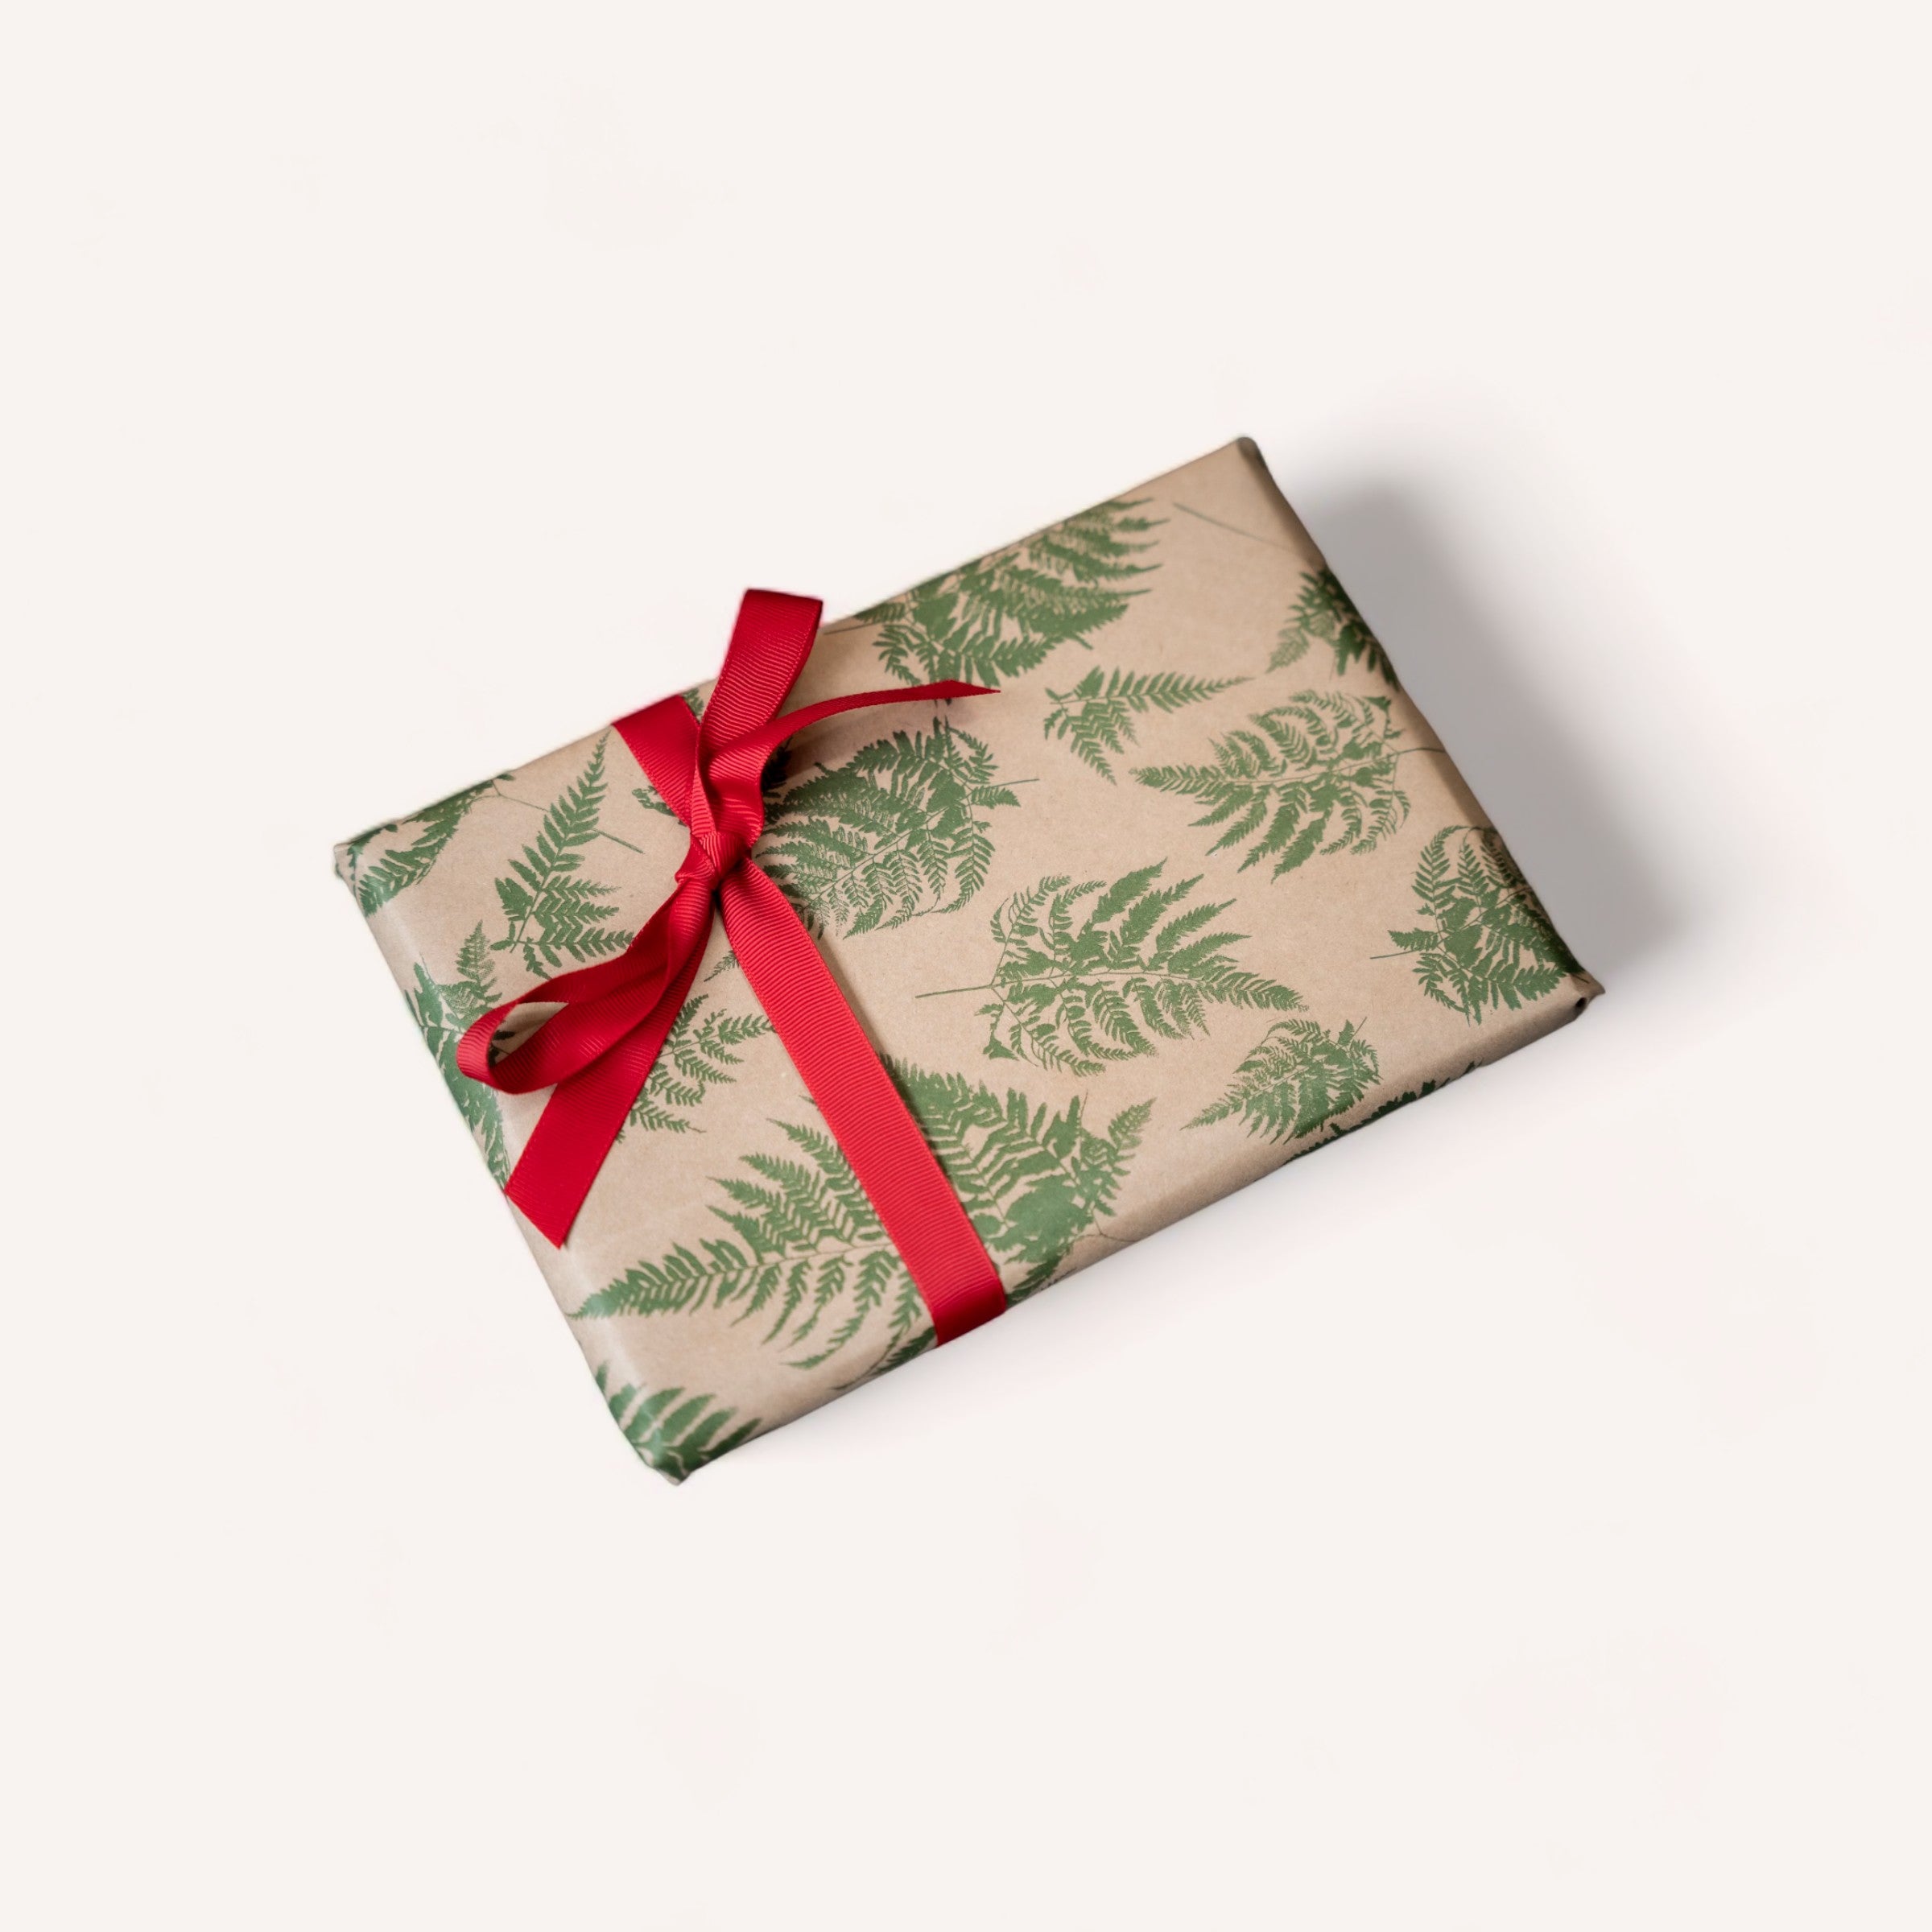 A neatly wrapped gift with fern patterned premium 65gsm giftbox co. paper and a red ribbon on a white background.